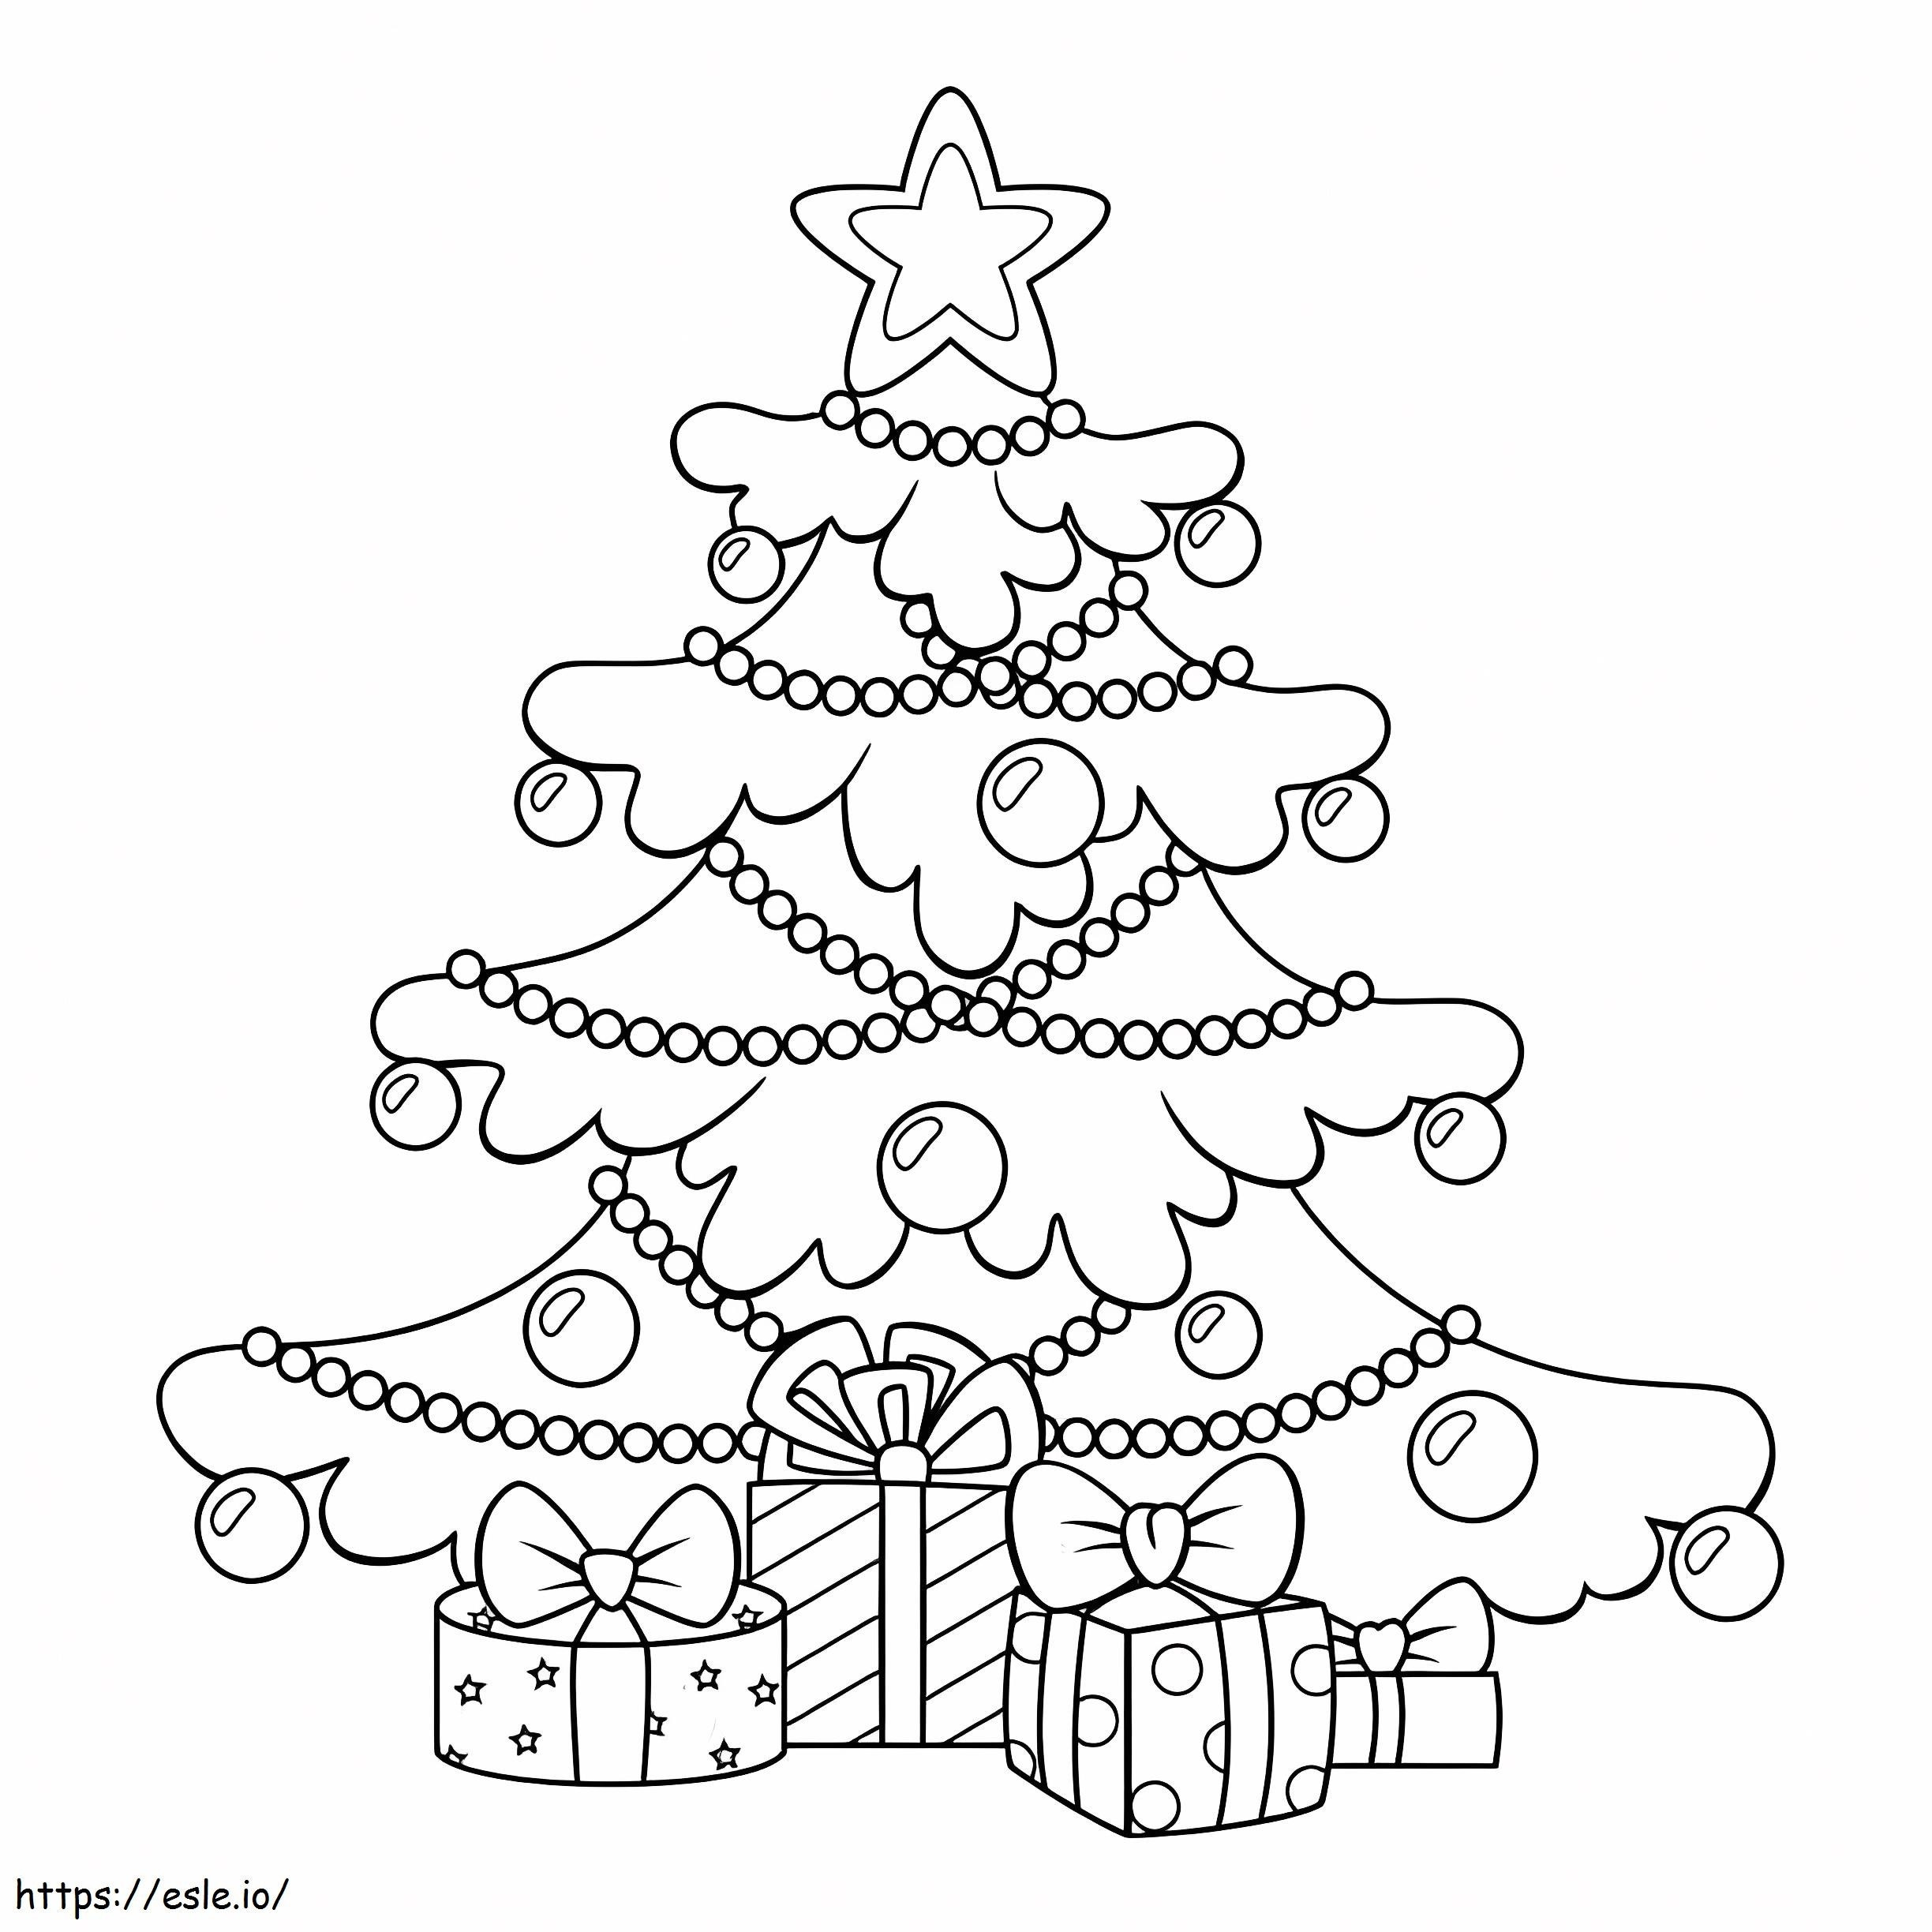 Christmas Tree With Gift Boxes coloring page